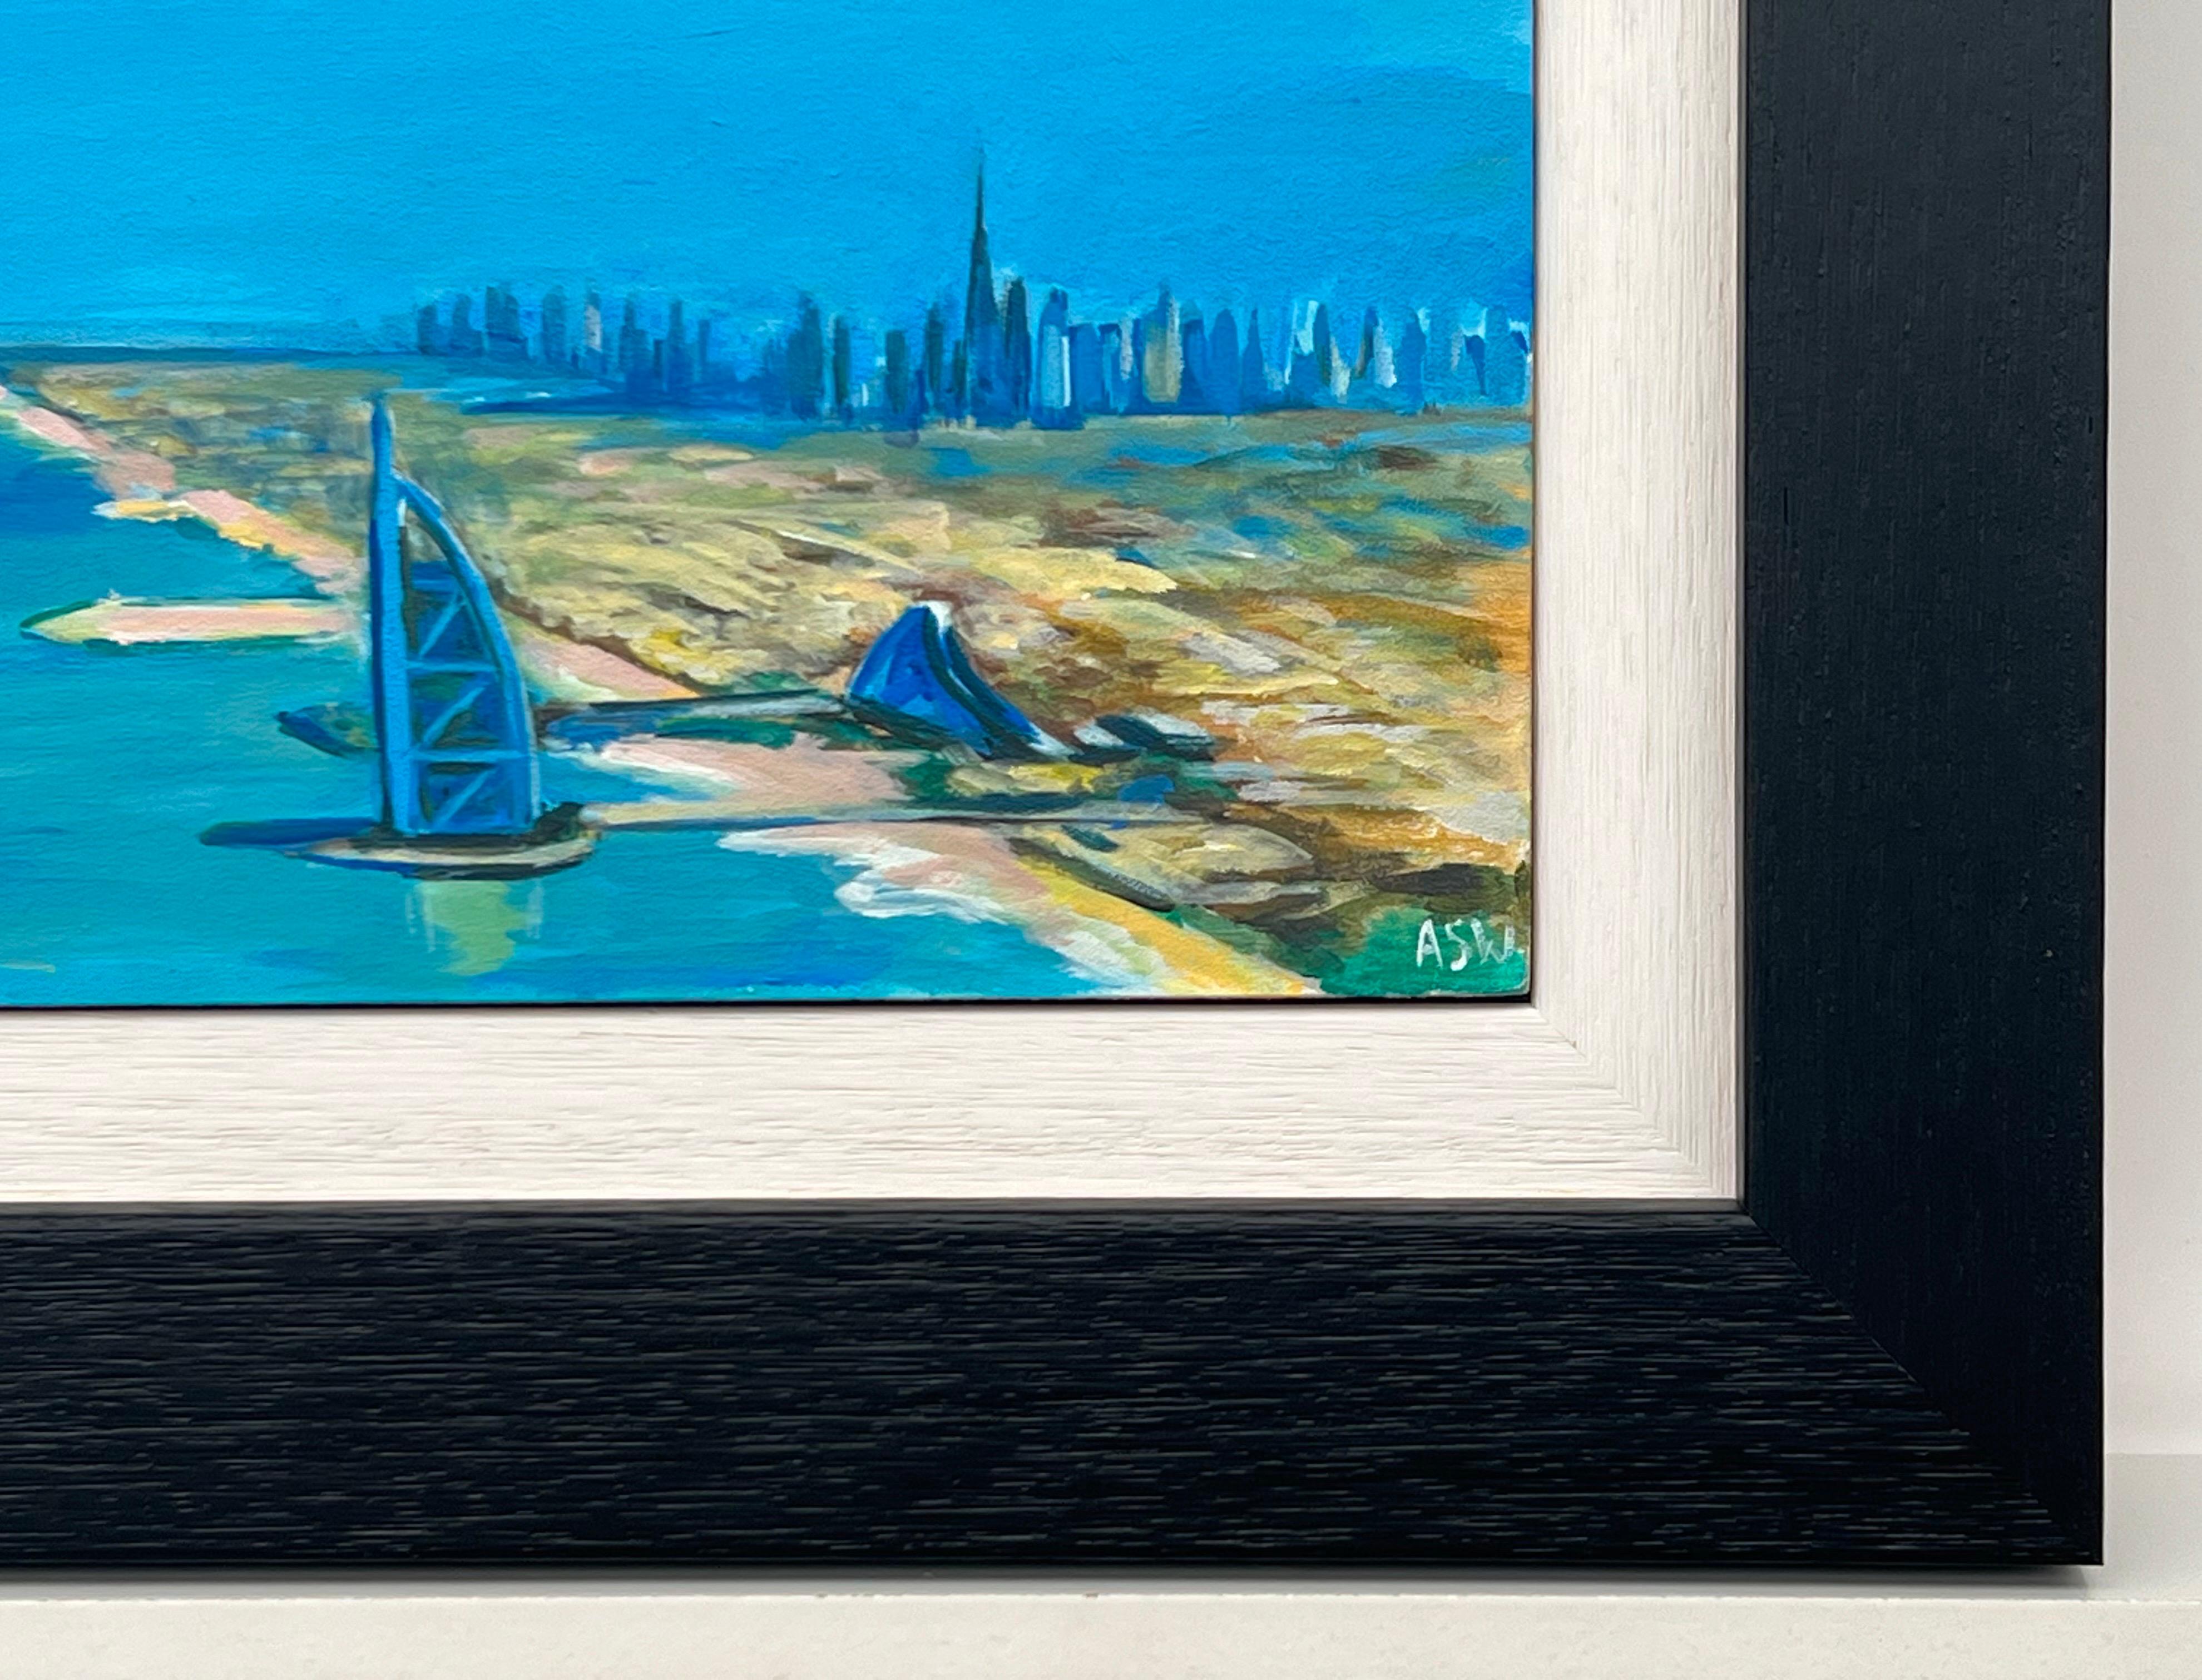 Miniature Painting of the City of Dubai United Arab Emirates UAE, a unique original from leading Contemporary British Artist, Angela Wakefield. A vibrant and futuristic skyline emerges from the canvas, as golden desert sands meet towering glass